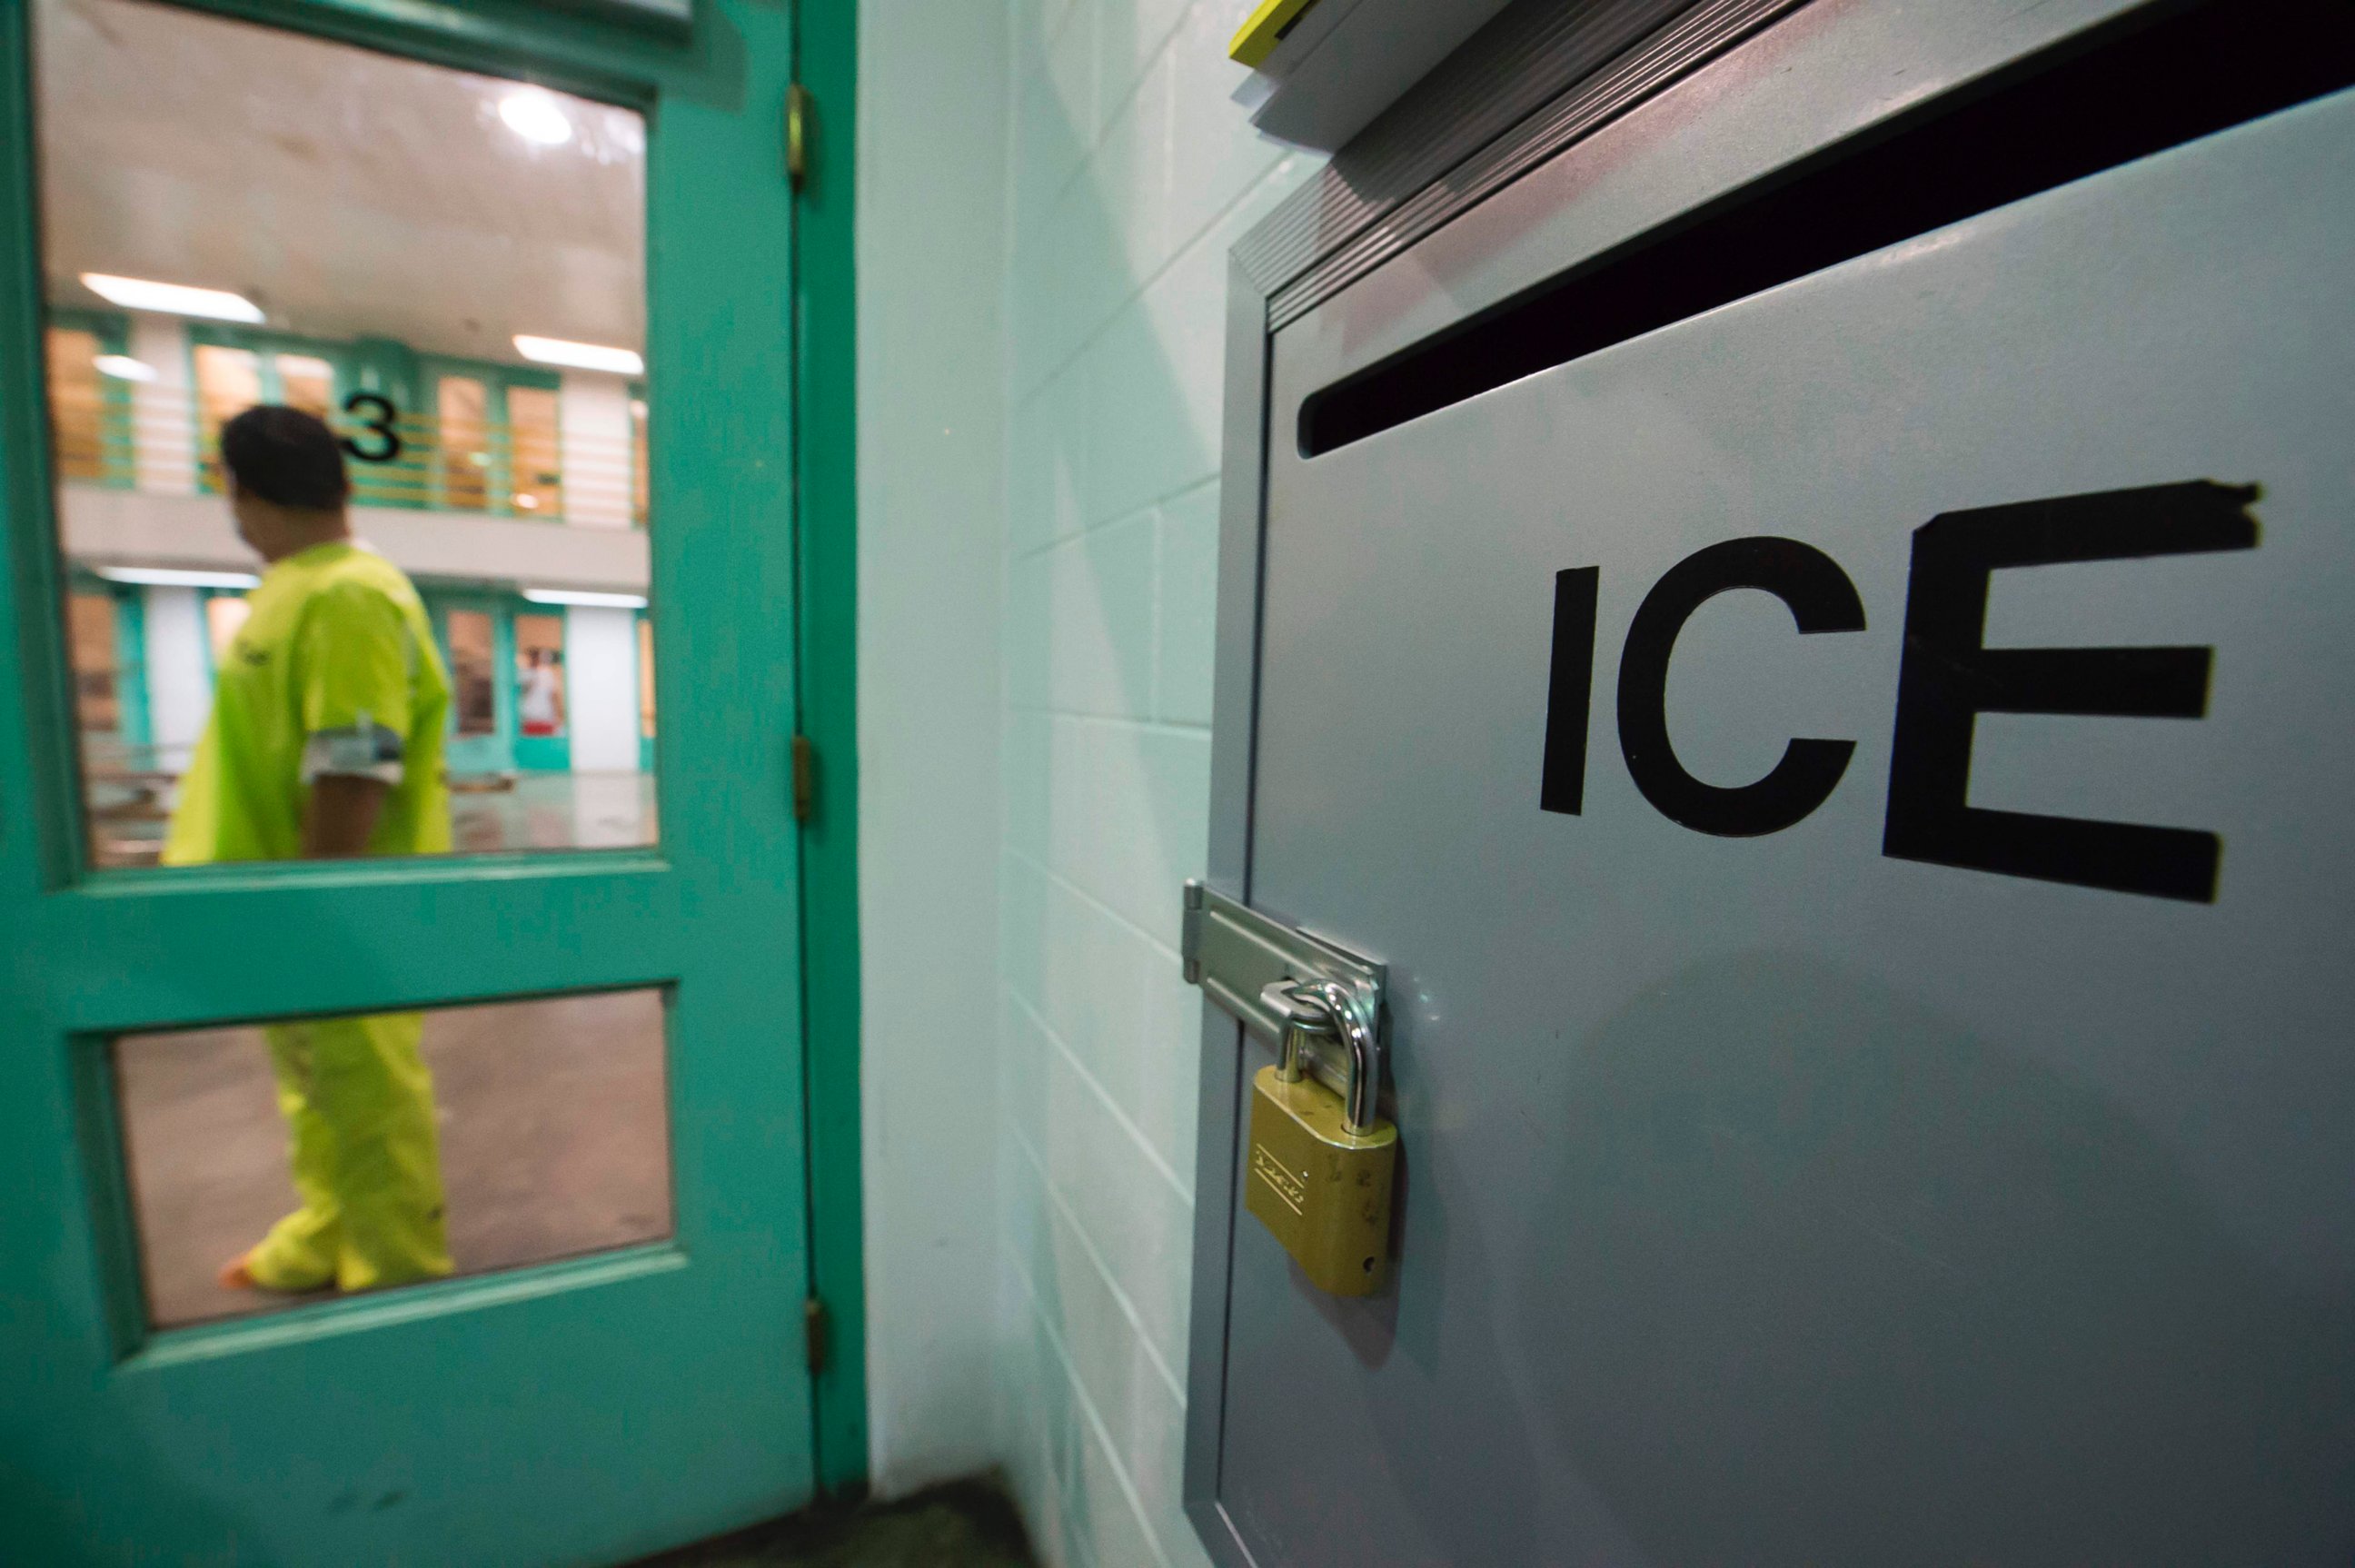 PHOTO: An immigration detainee stands near a U.S. Immigration and Customs Enforcement (ICE) grievance box in the high security unit at the Theo Lacy Facility, March 14, 2017 in Orange, California.
 